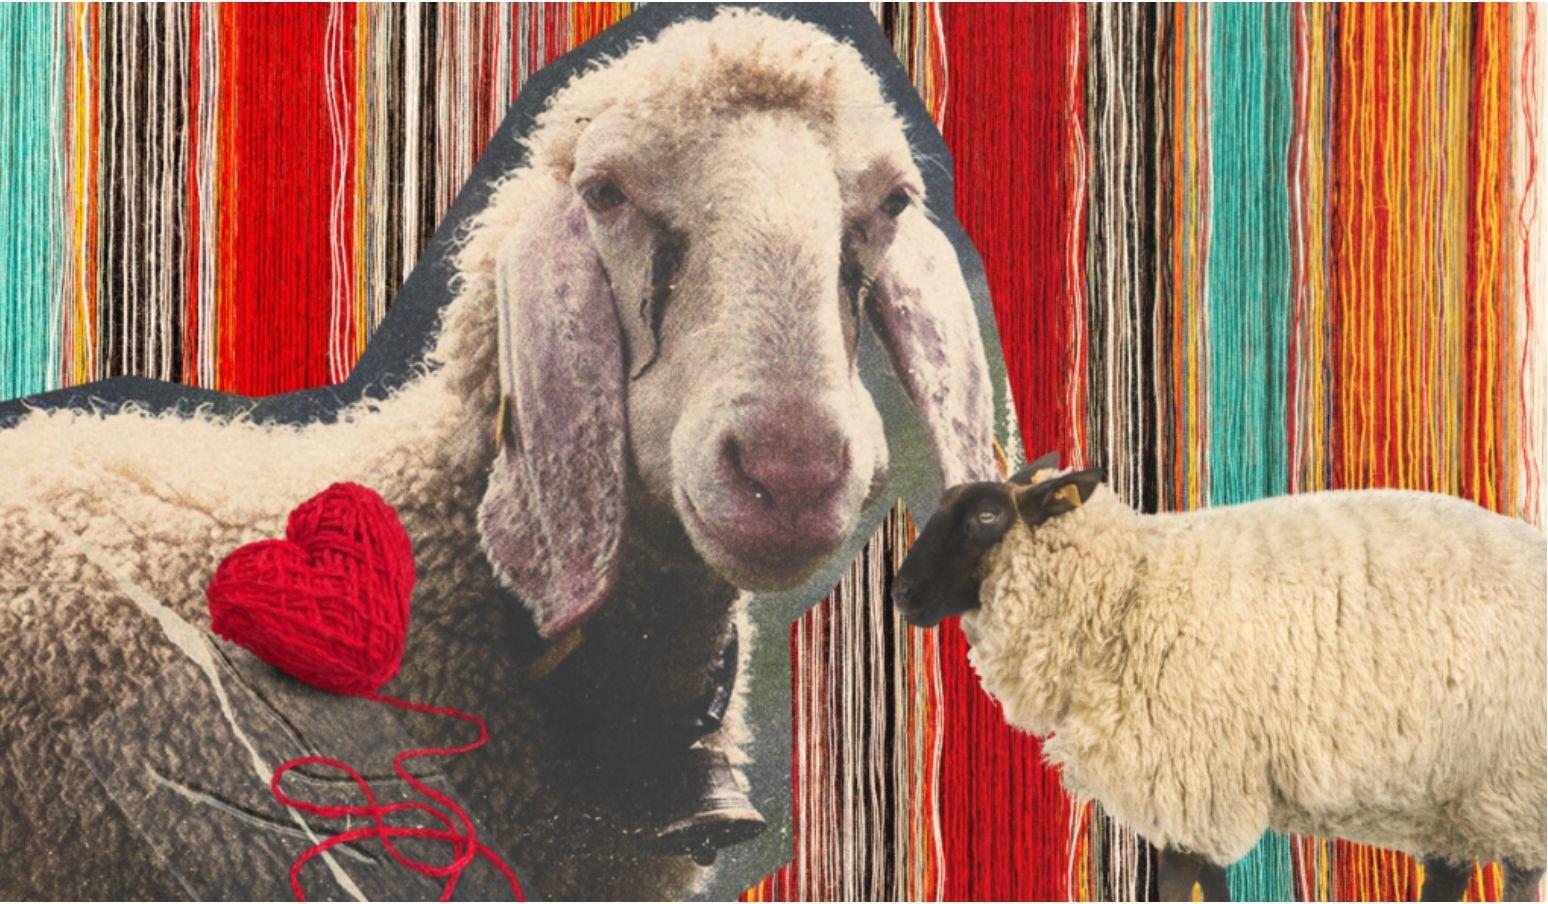 Is sheep wool good for people and planet?